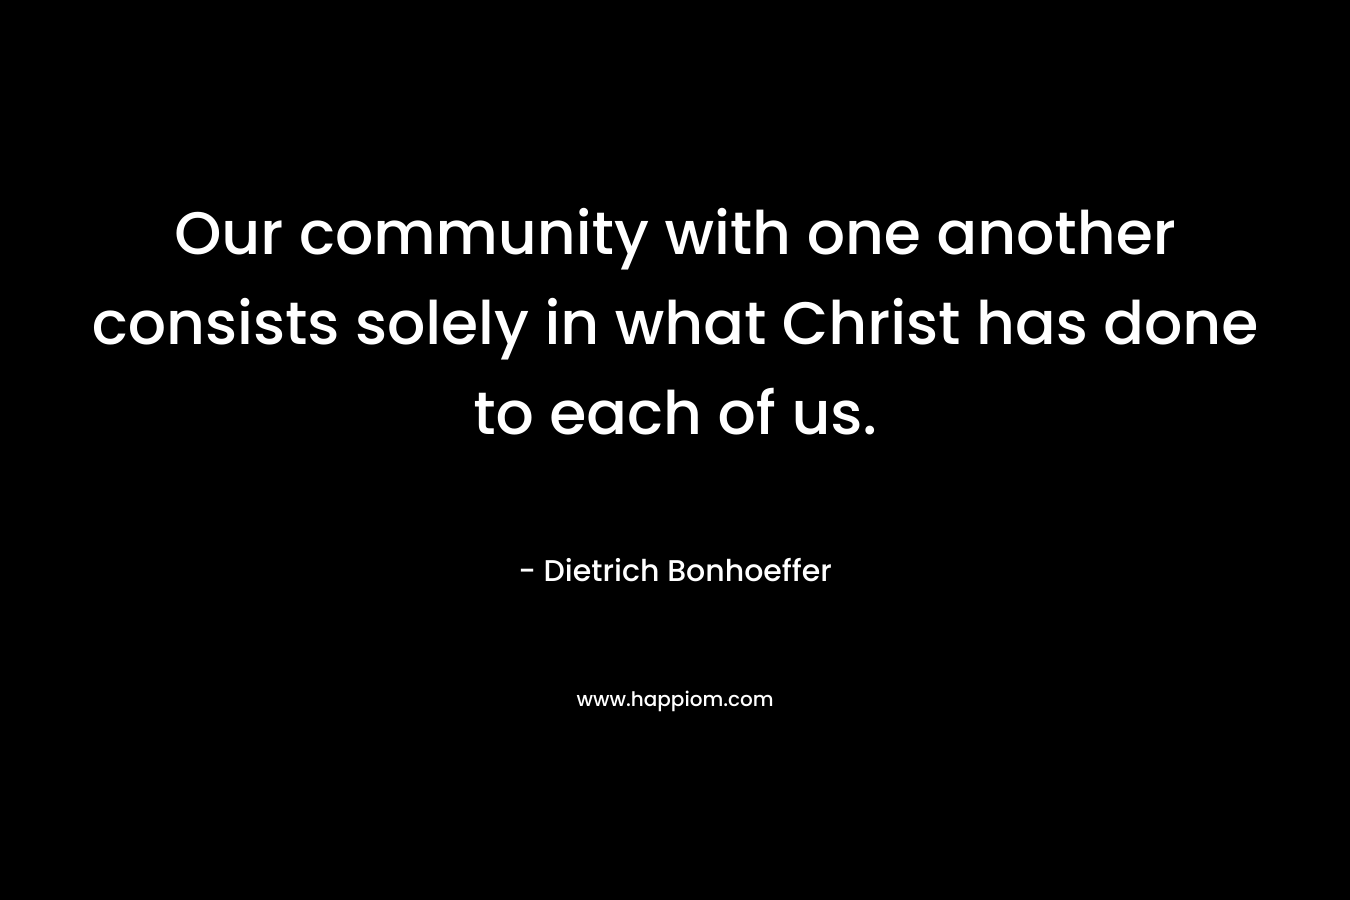 Our community with one another consists solely in what Christ has done to each of us. – Dietrich Bonhoeffer